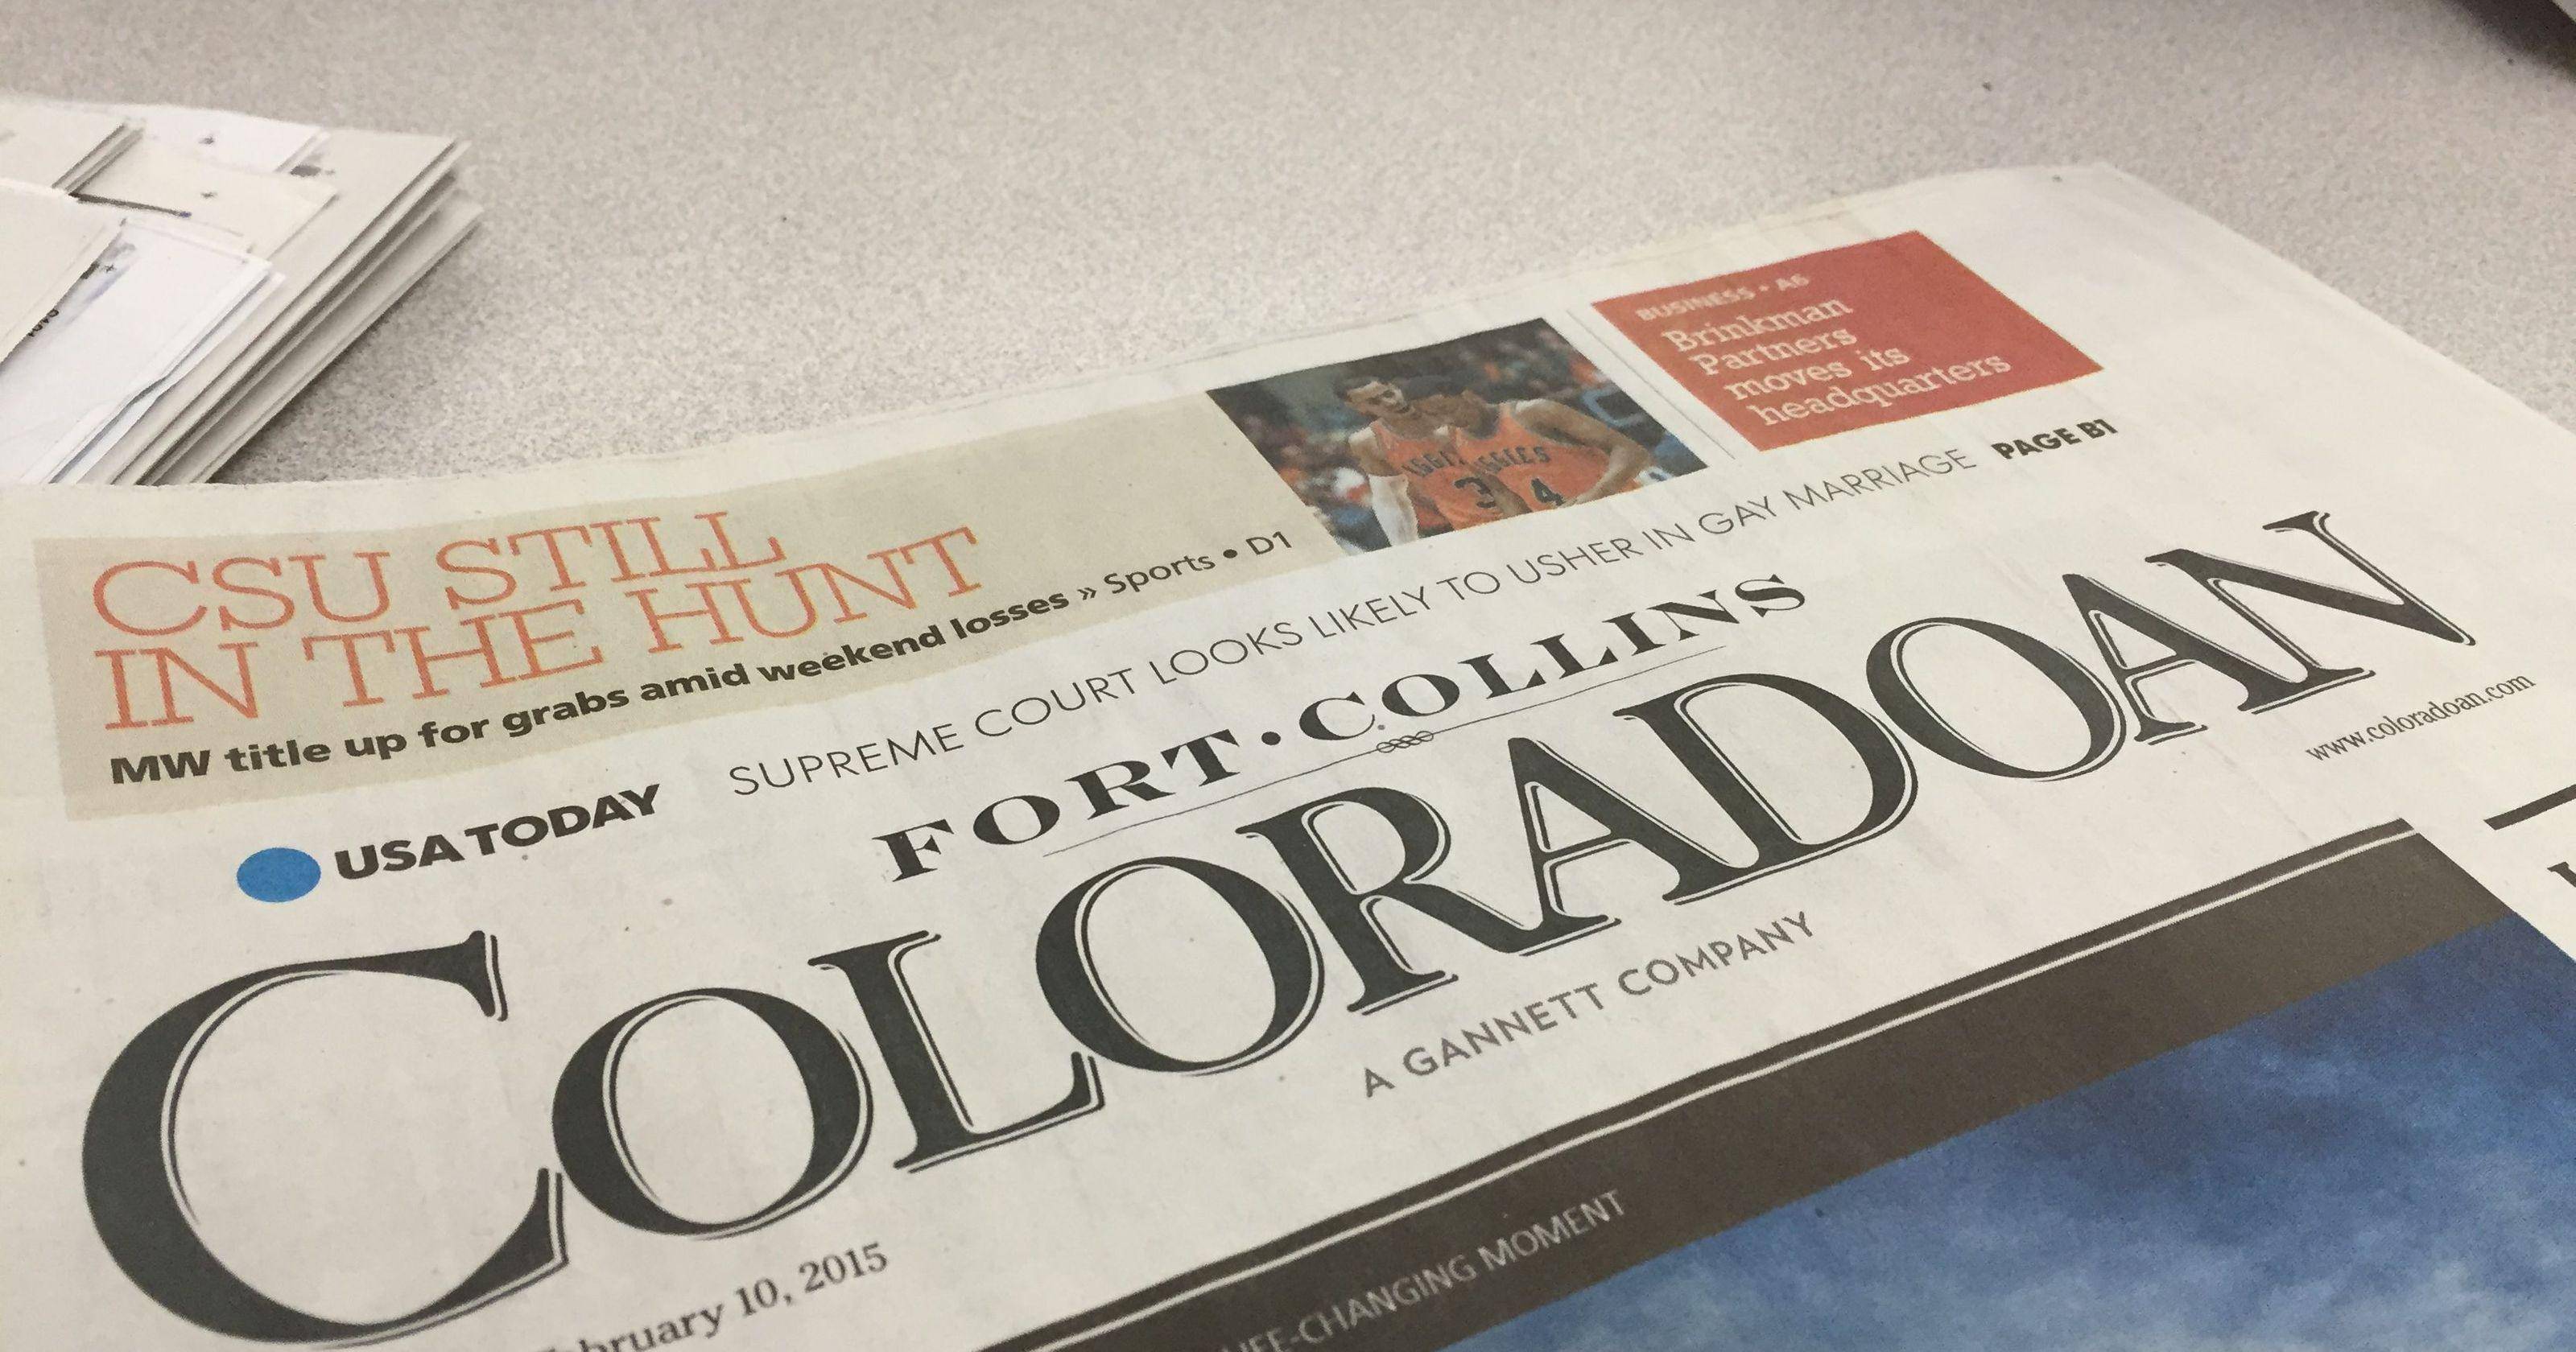 Fort Collins Coloradoan Sunday Only Delivery For 8 Weeks - SureShot Books Publishing LLC